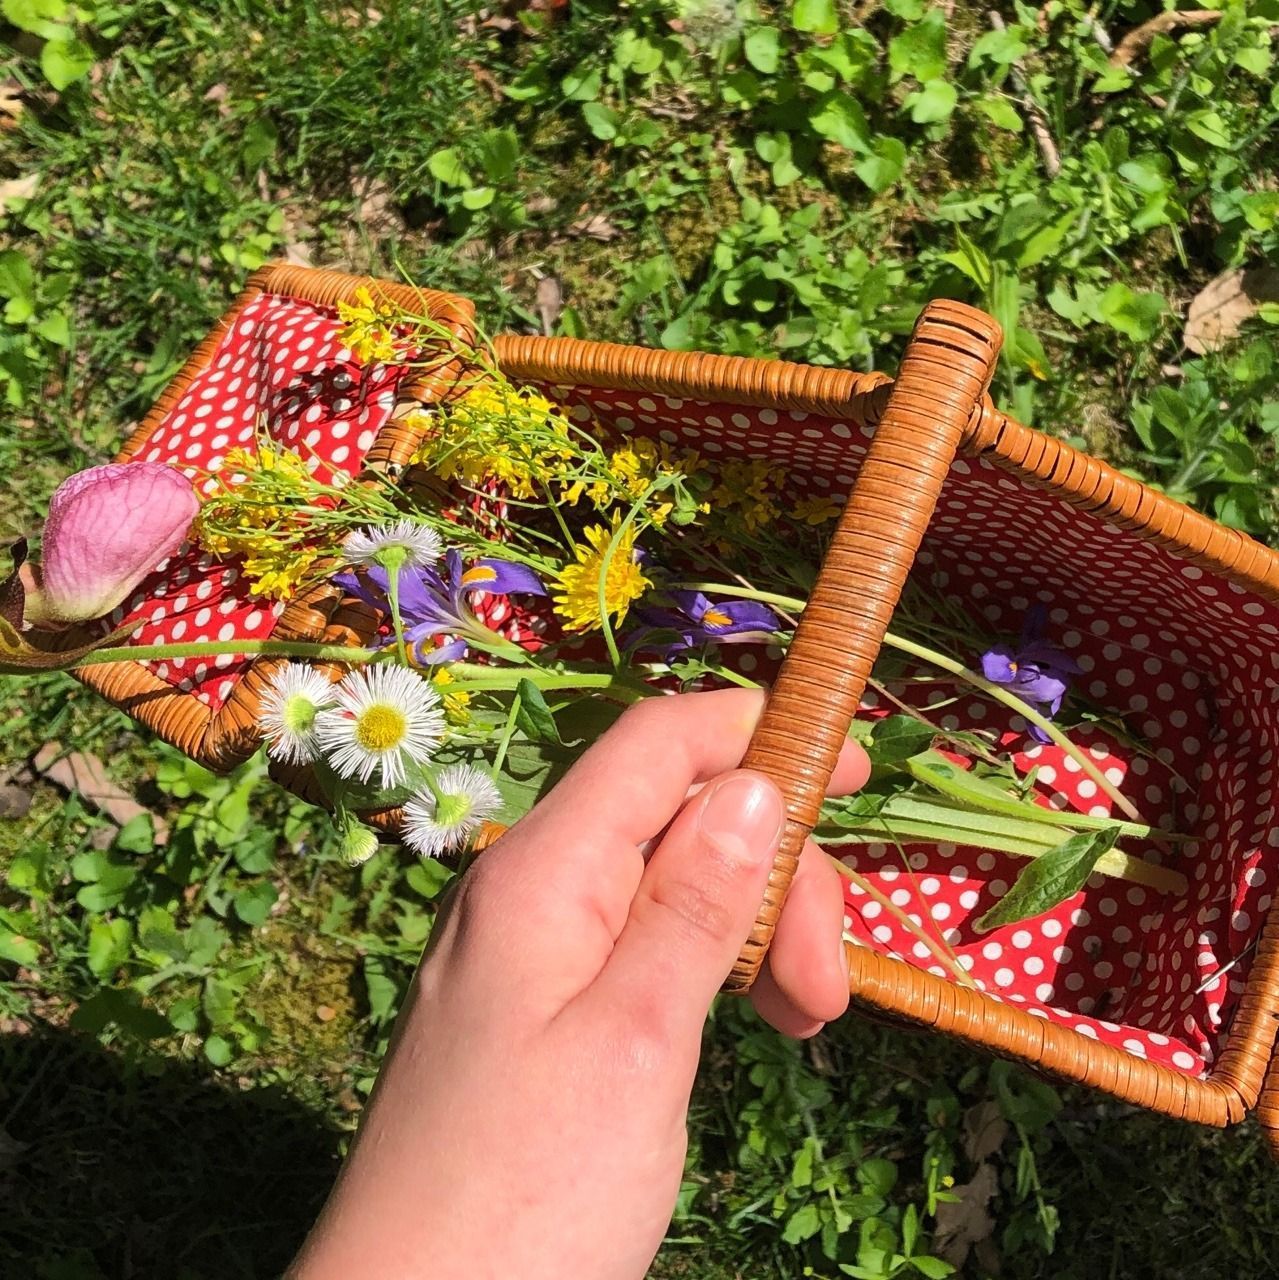 A hand holding a wicker basket filled with wildflowers. - Cottagecore